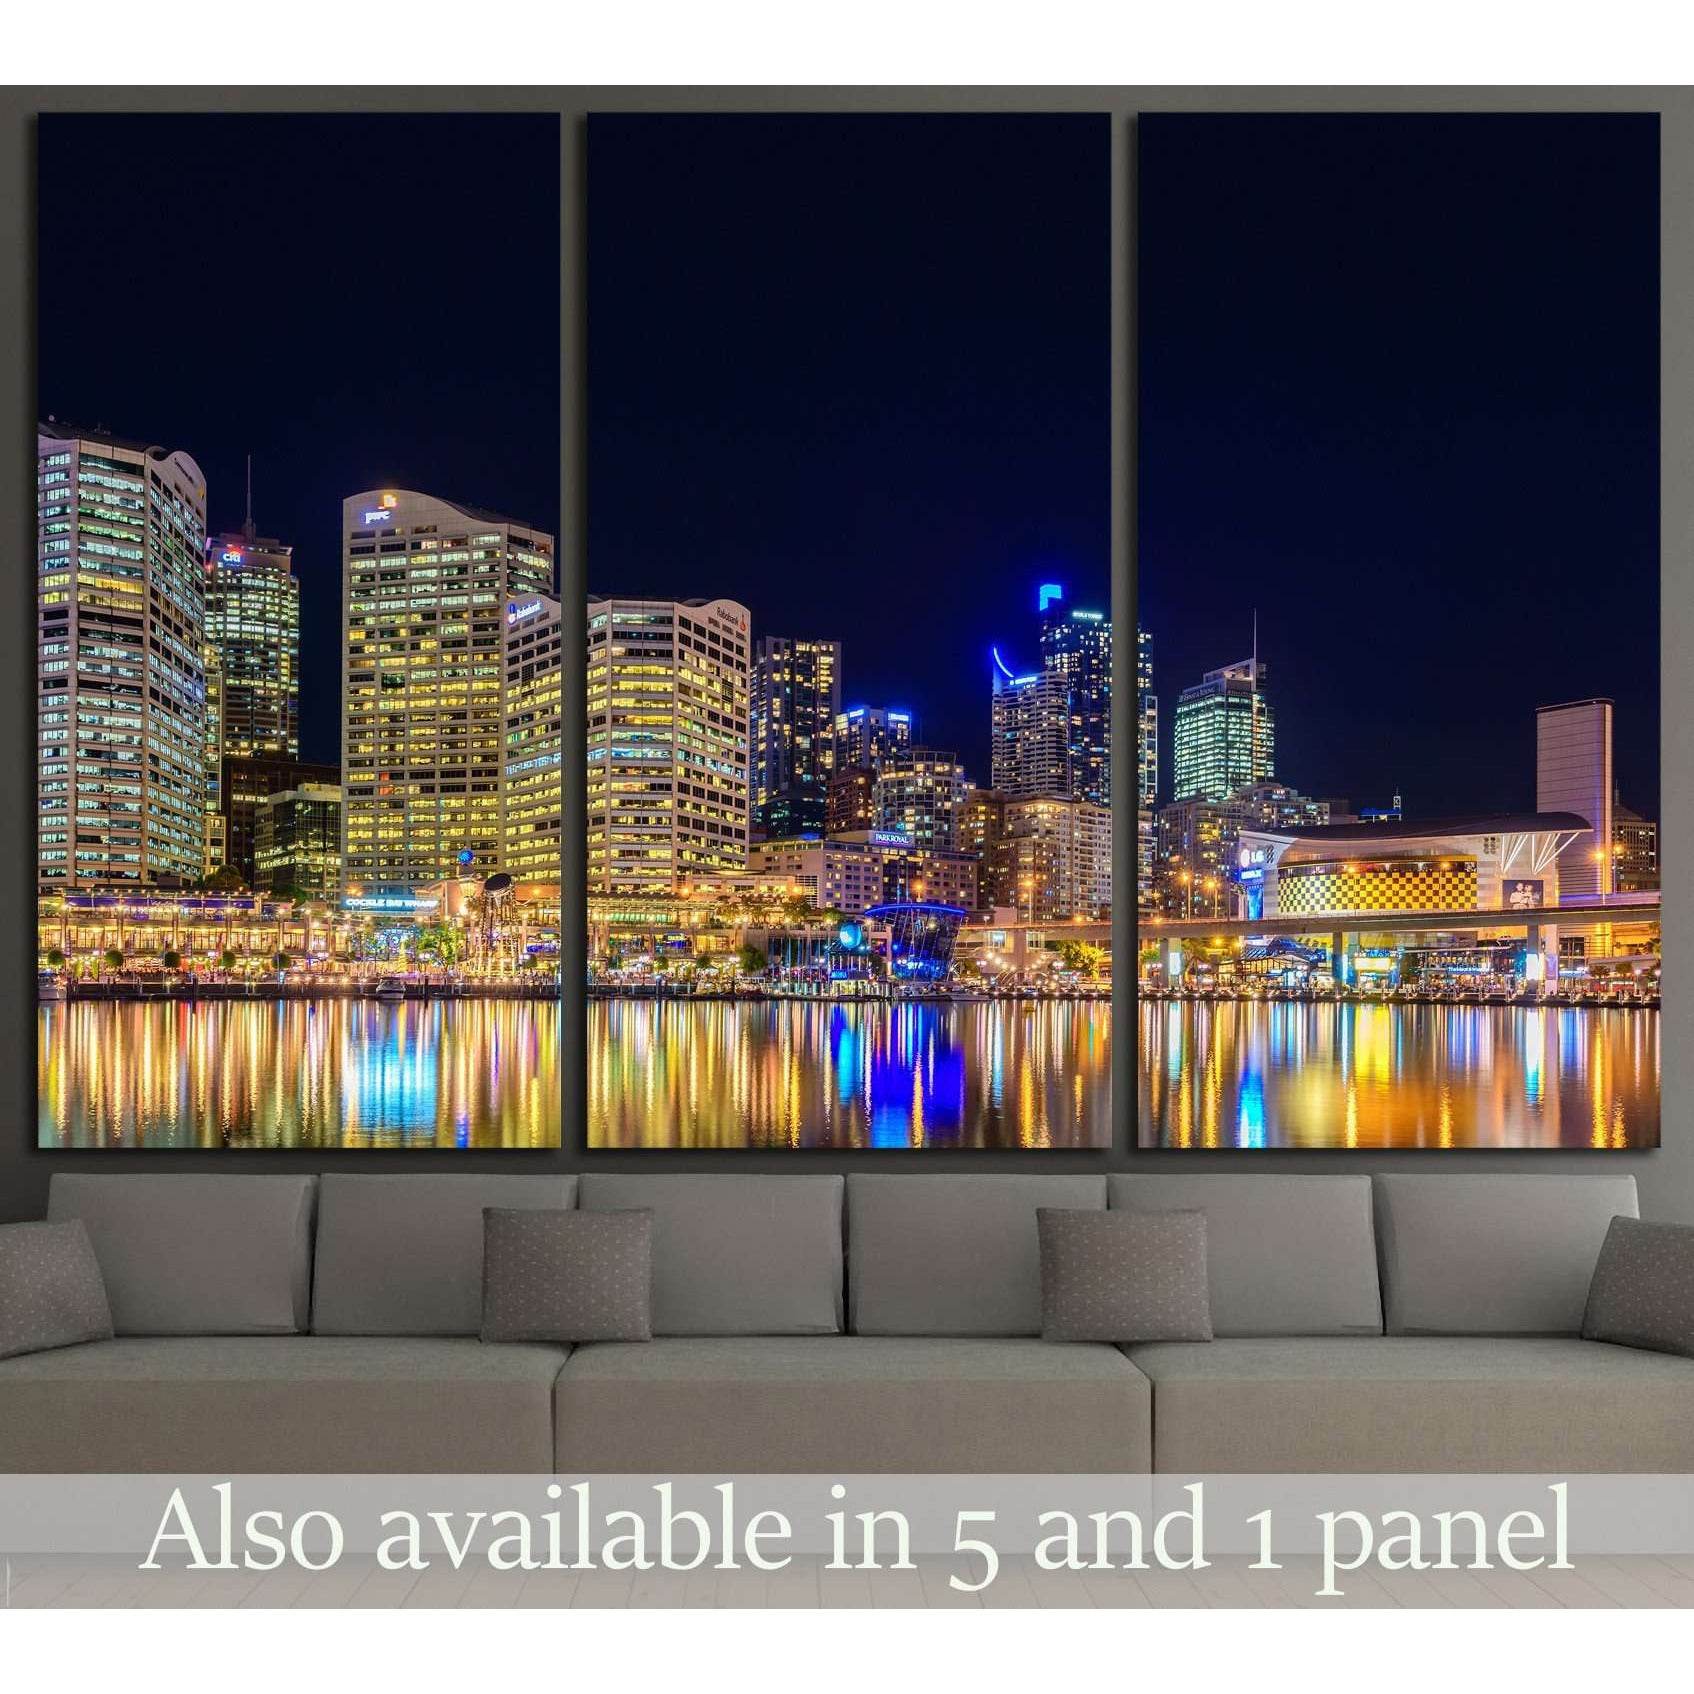 Sydney, Australiaб Darling Harbour skyline view at night time №2203 Ready to Hang Canvas Print